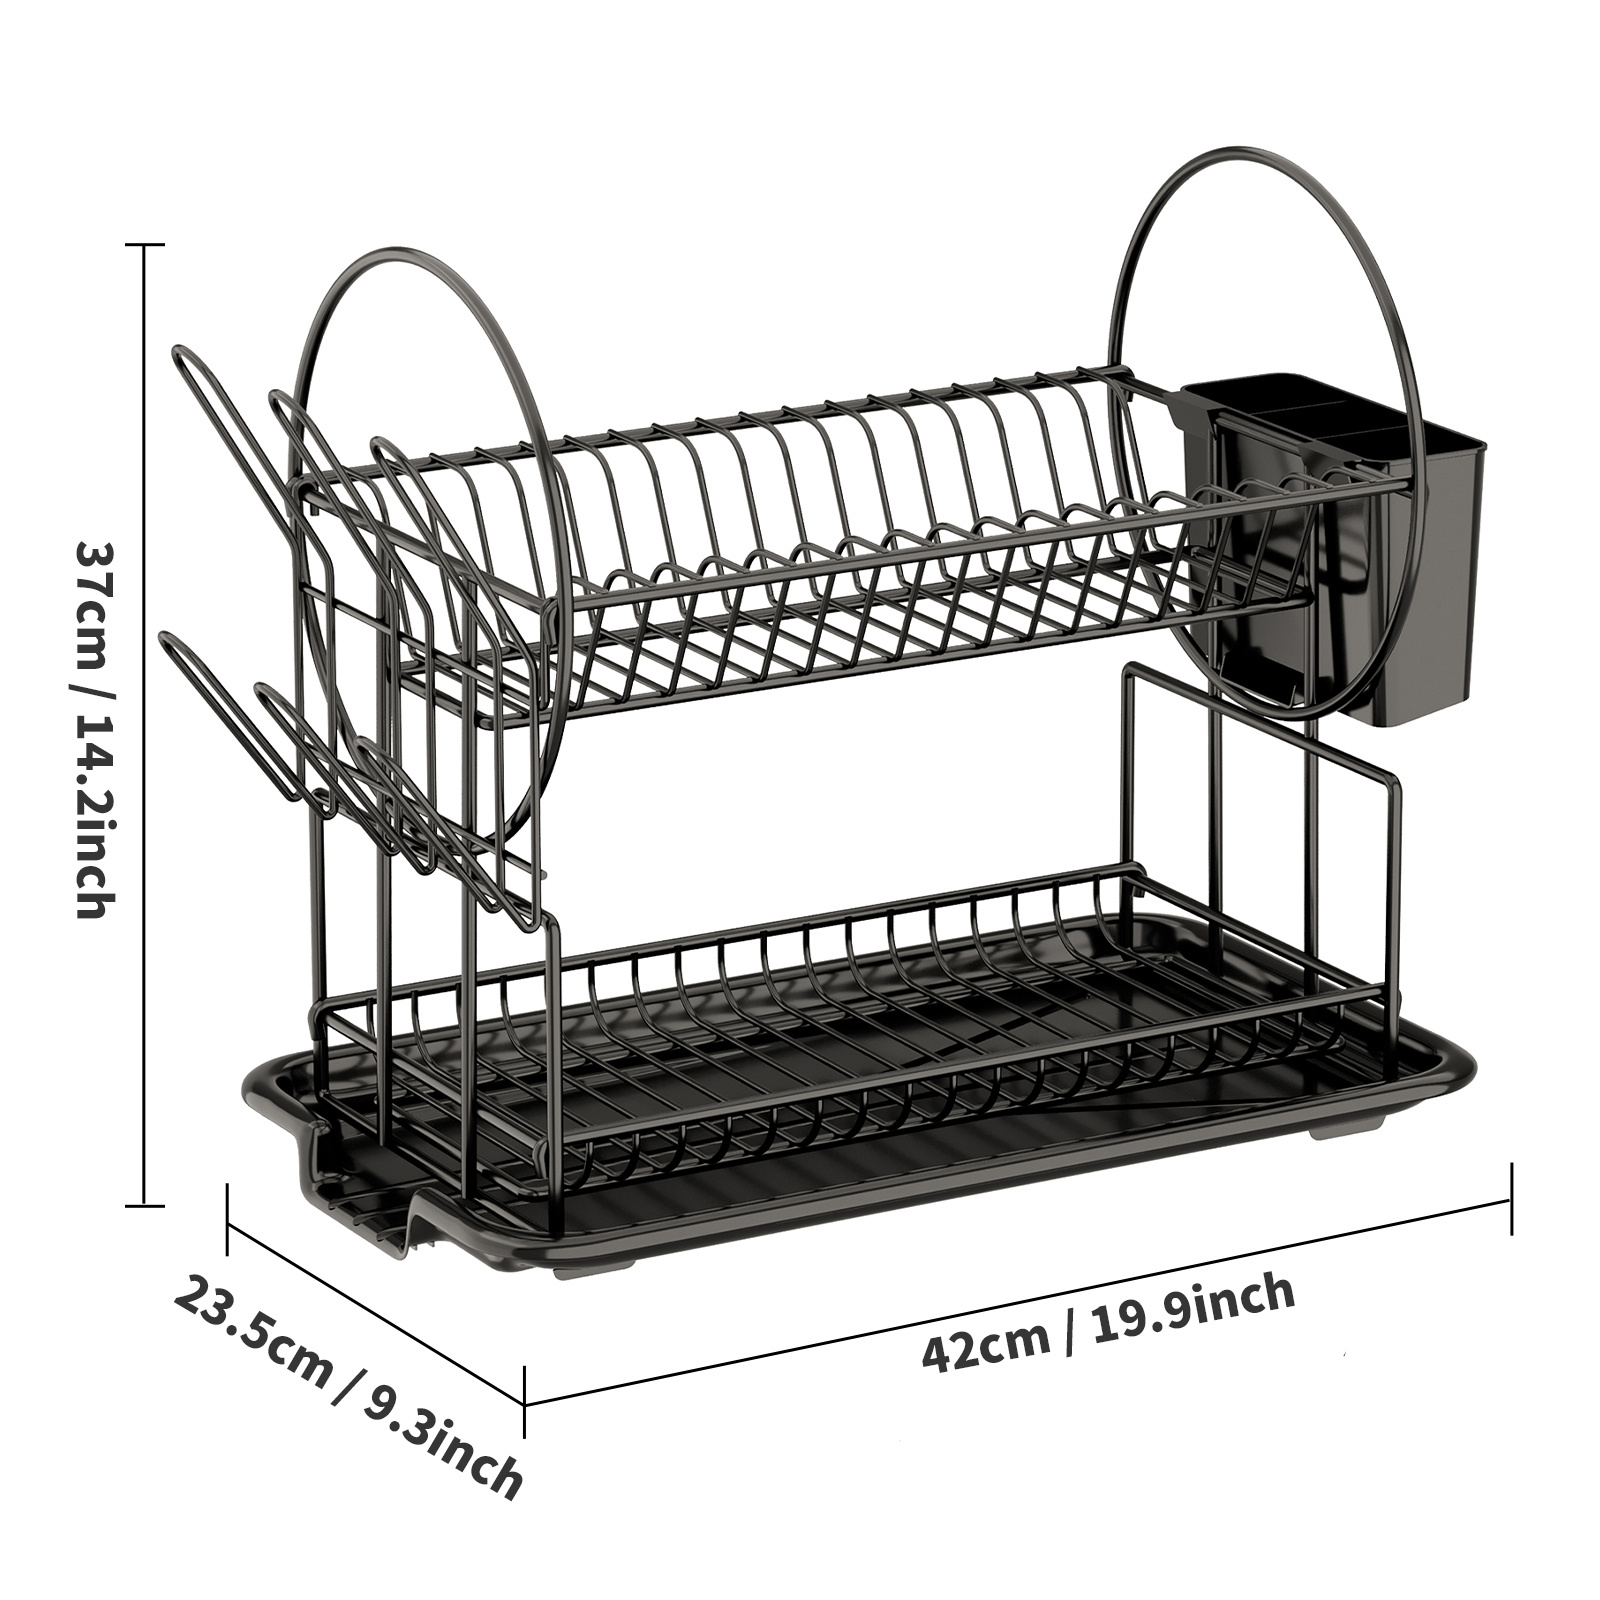 1Easylife Dish Drying Rack, 3 Tier Dish Rack with Tray Utensil Holder,  Large Capacity Dish Drainer with Cutting Board Holder Drain Board Tray for